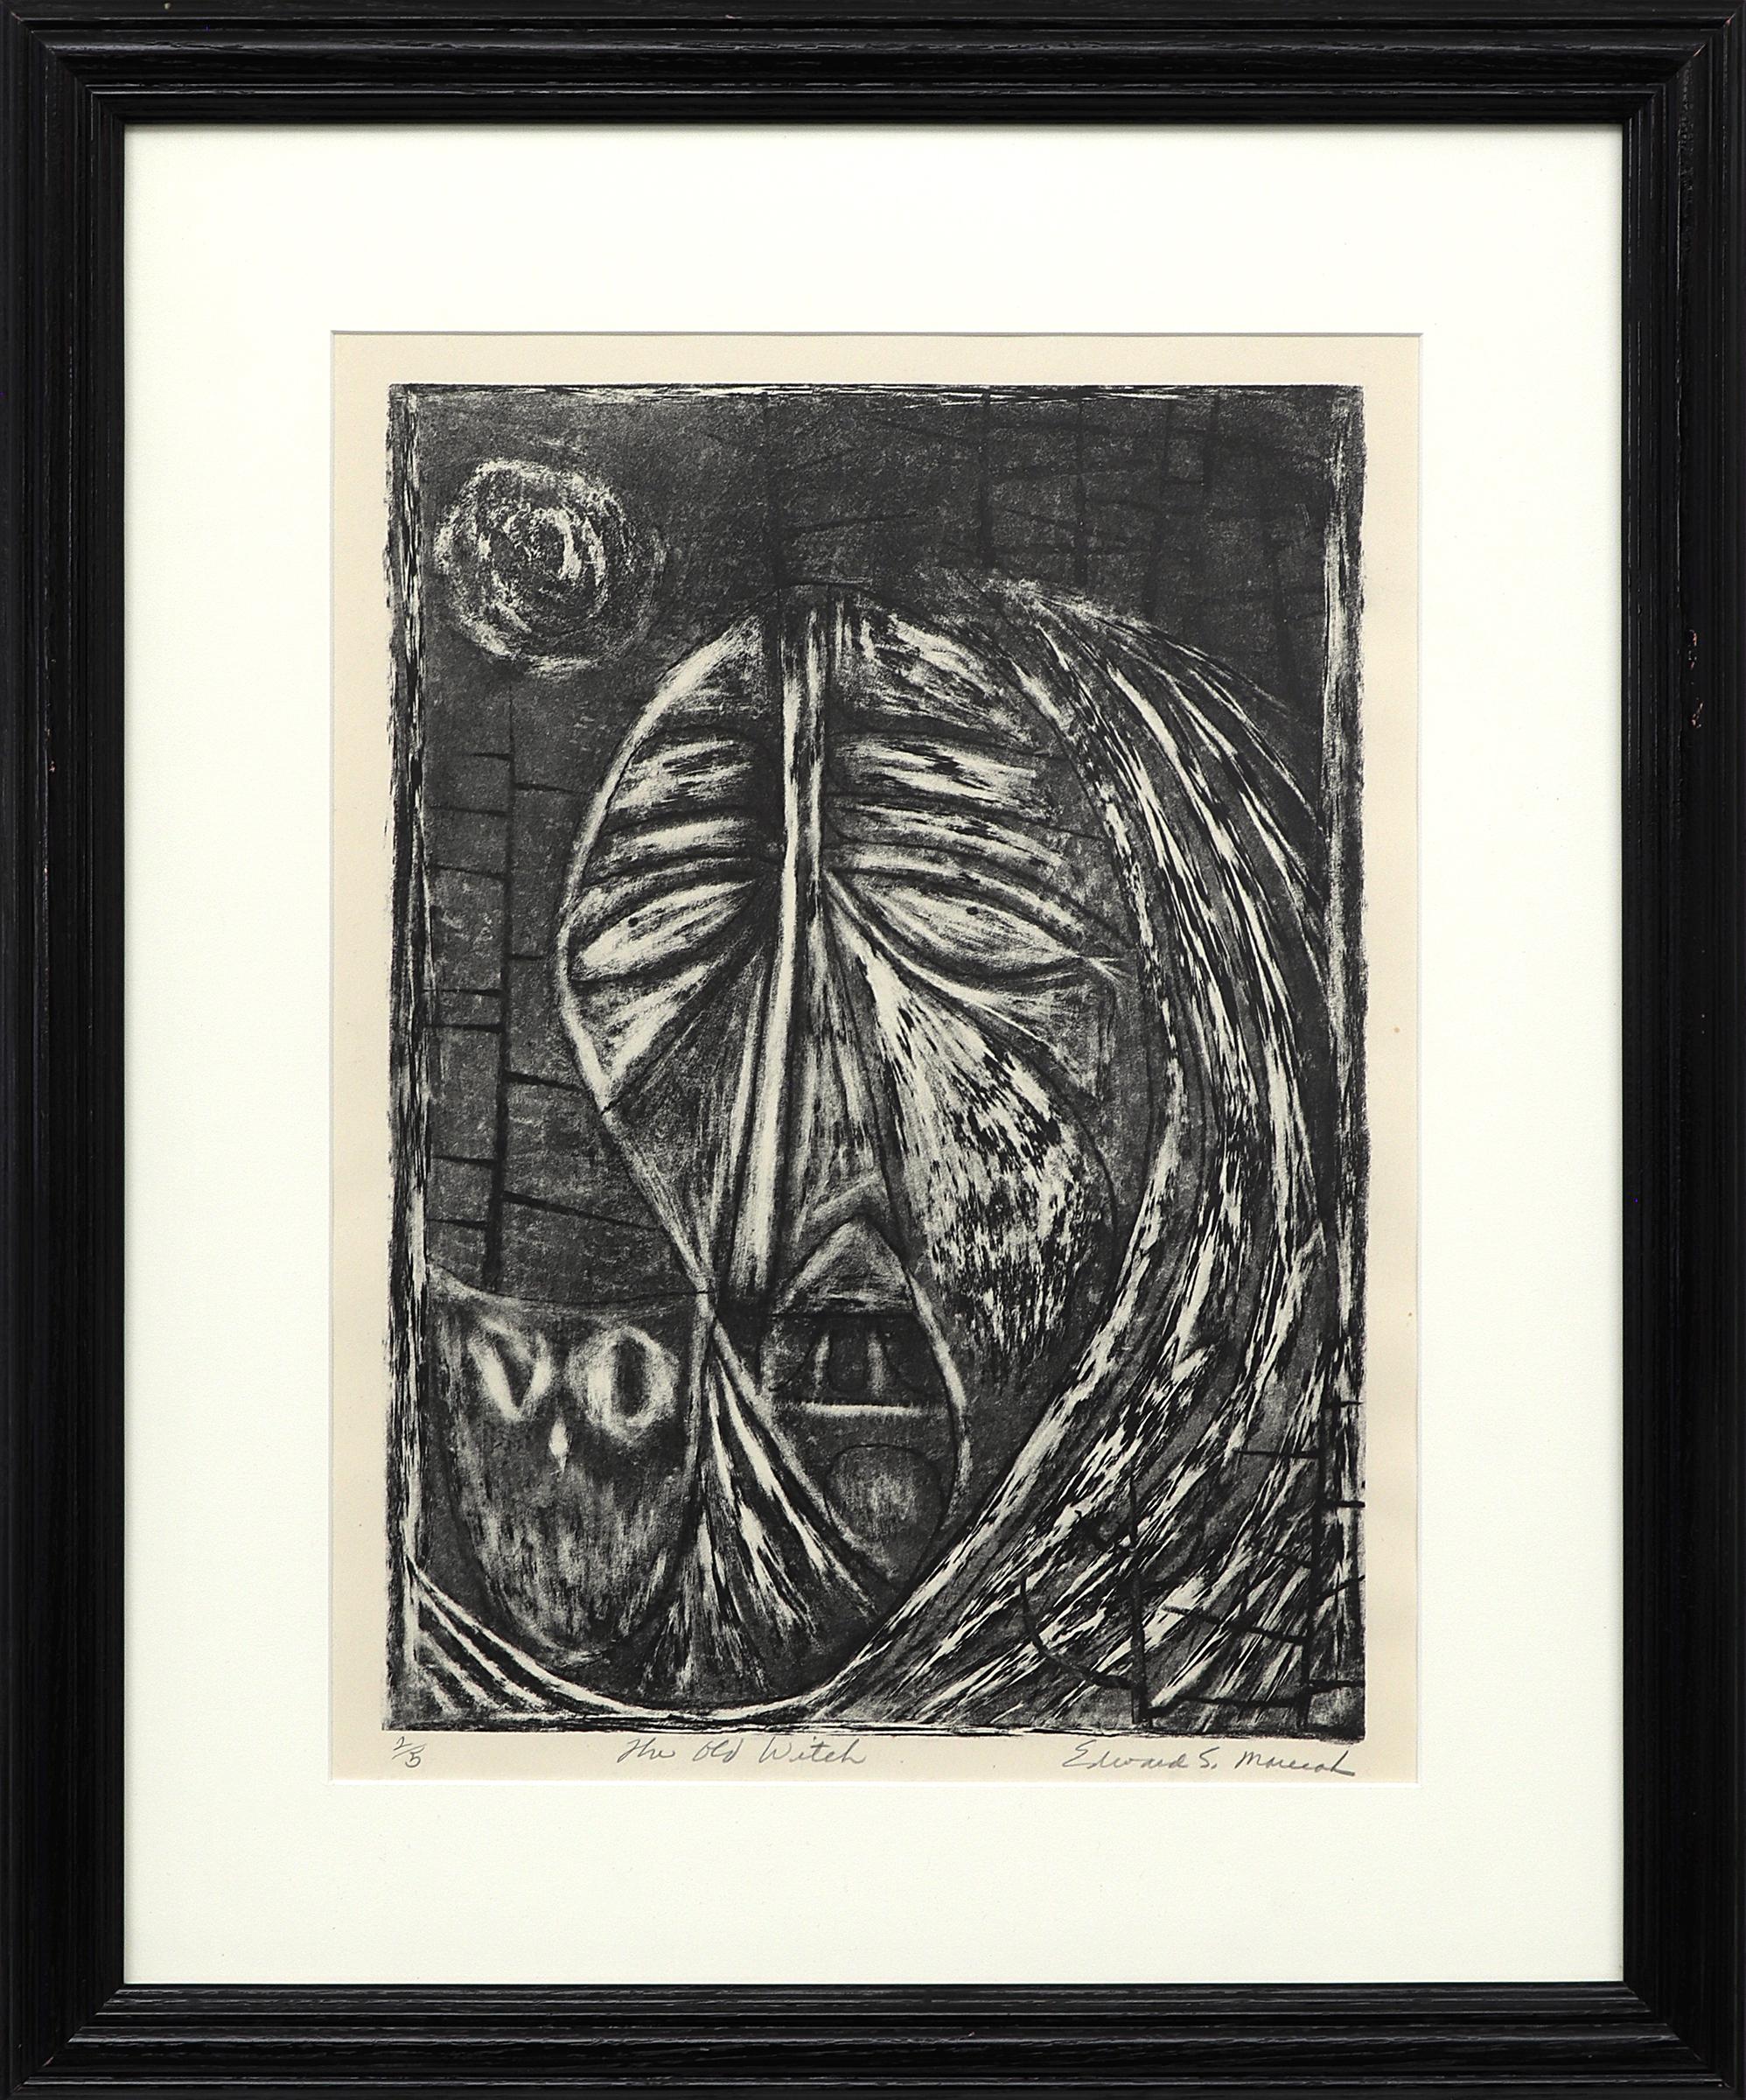 The Old Witch (Ed's Last Litho) (2/5), Framed 1940s Lithograph Abstract Portrait